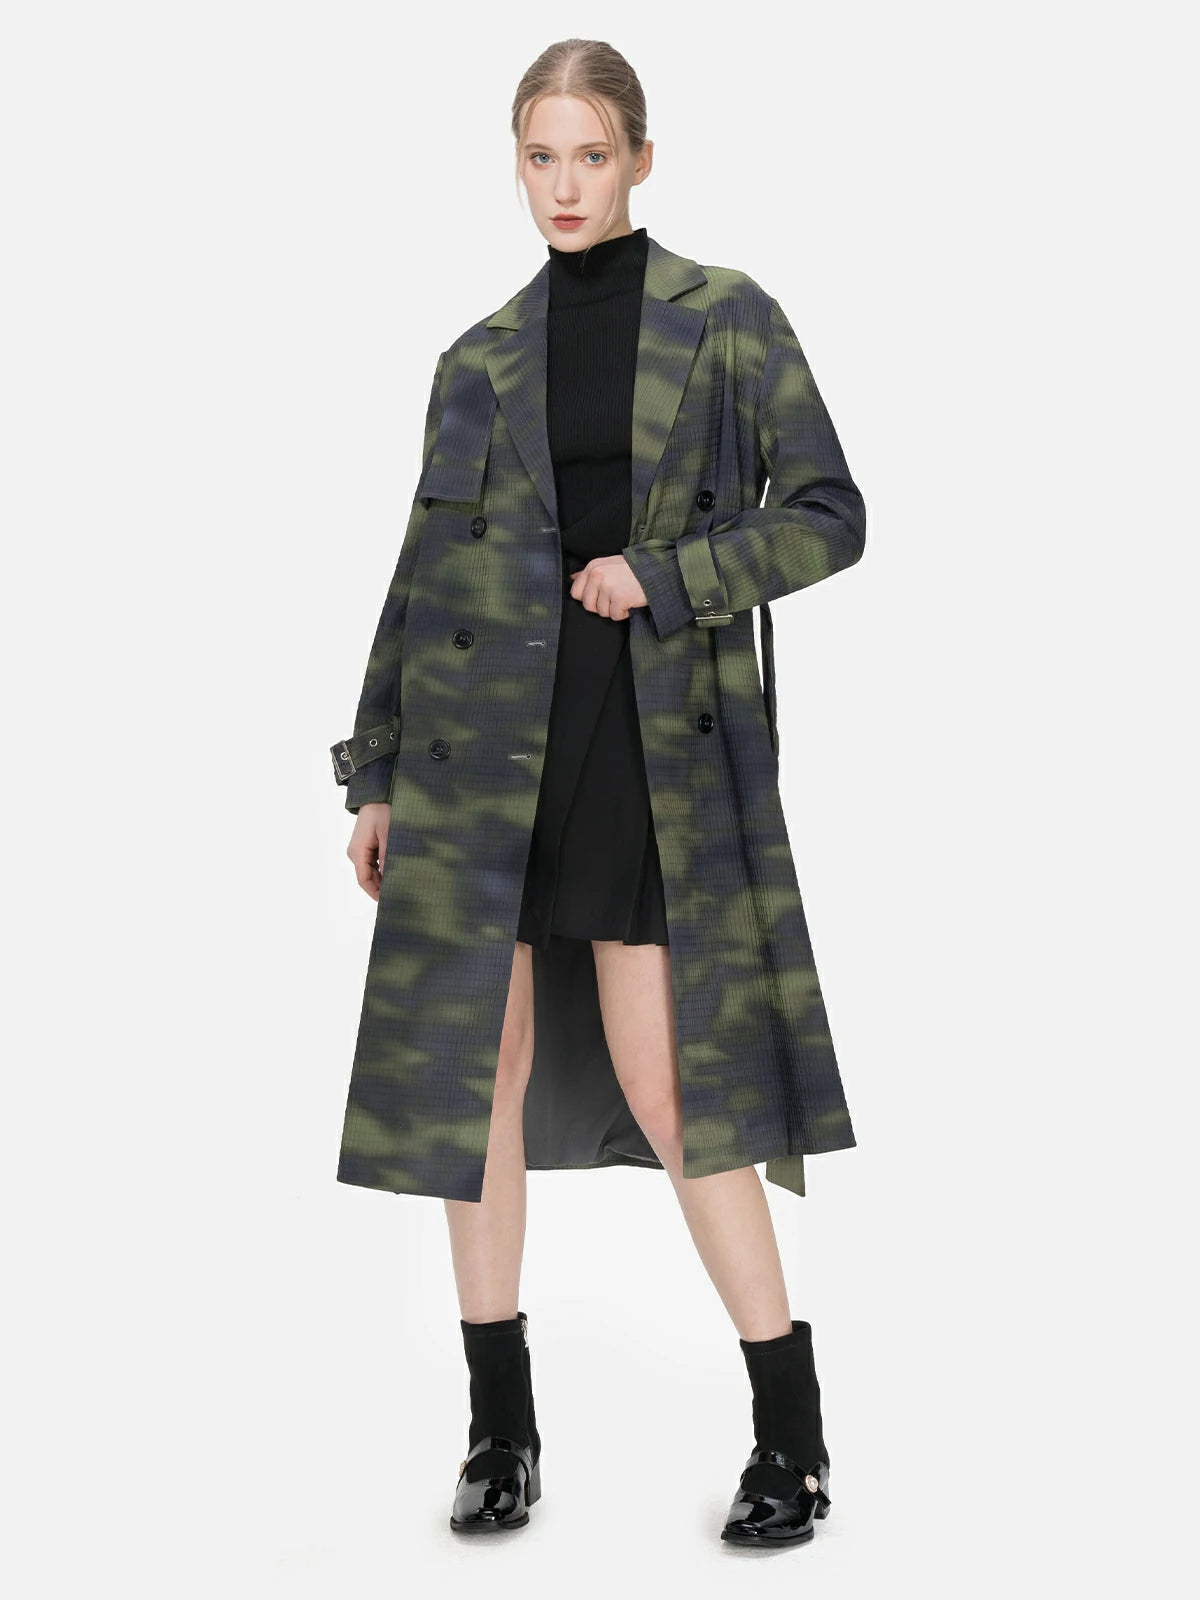 Elevate your wardrobe with this gray and green trench coat, featuring irregular prints that add an artistic flair, creating a unique and stylish ensemble.